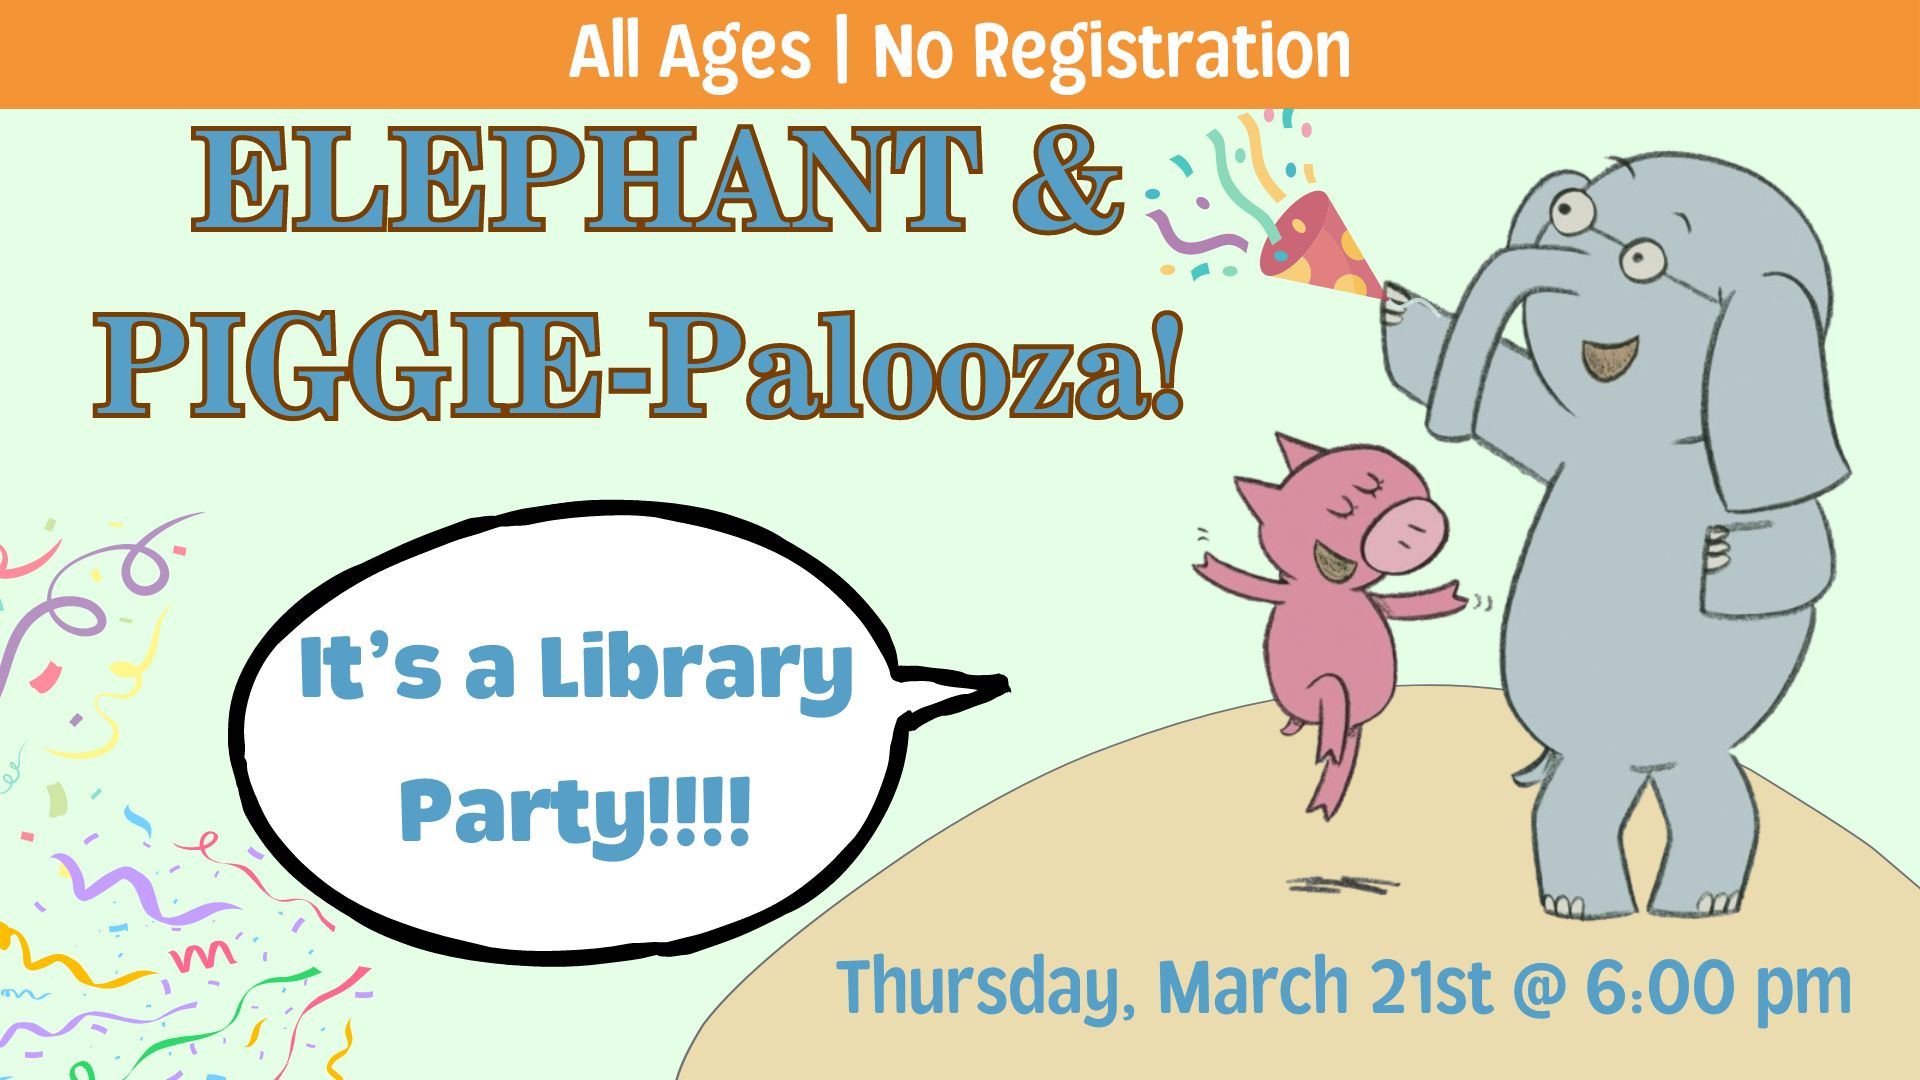 Graphic of Mo Willams Elephant and Piggie dancing. Elephant is holding a party noise maker.   Piggie is aying "It's a library party!".   Text reads All ages. No registration. Elephant and Piggie-palooza.  Thursday, March 21 from 6-7 pm